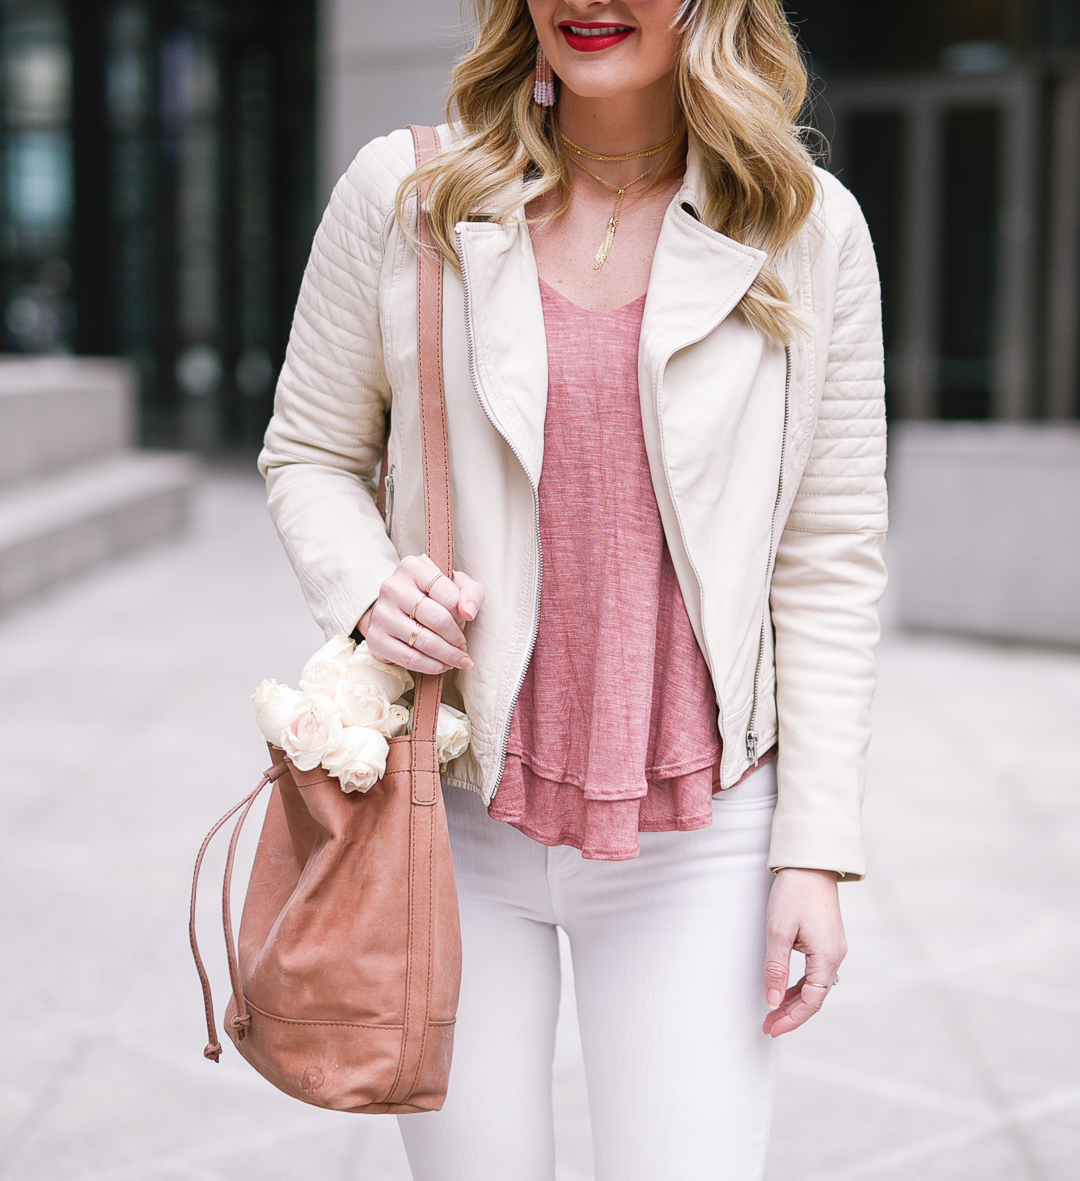 $29 layered tank top in coral blush pink by BP Nordstrom. 